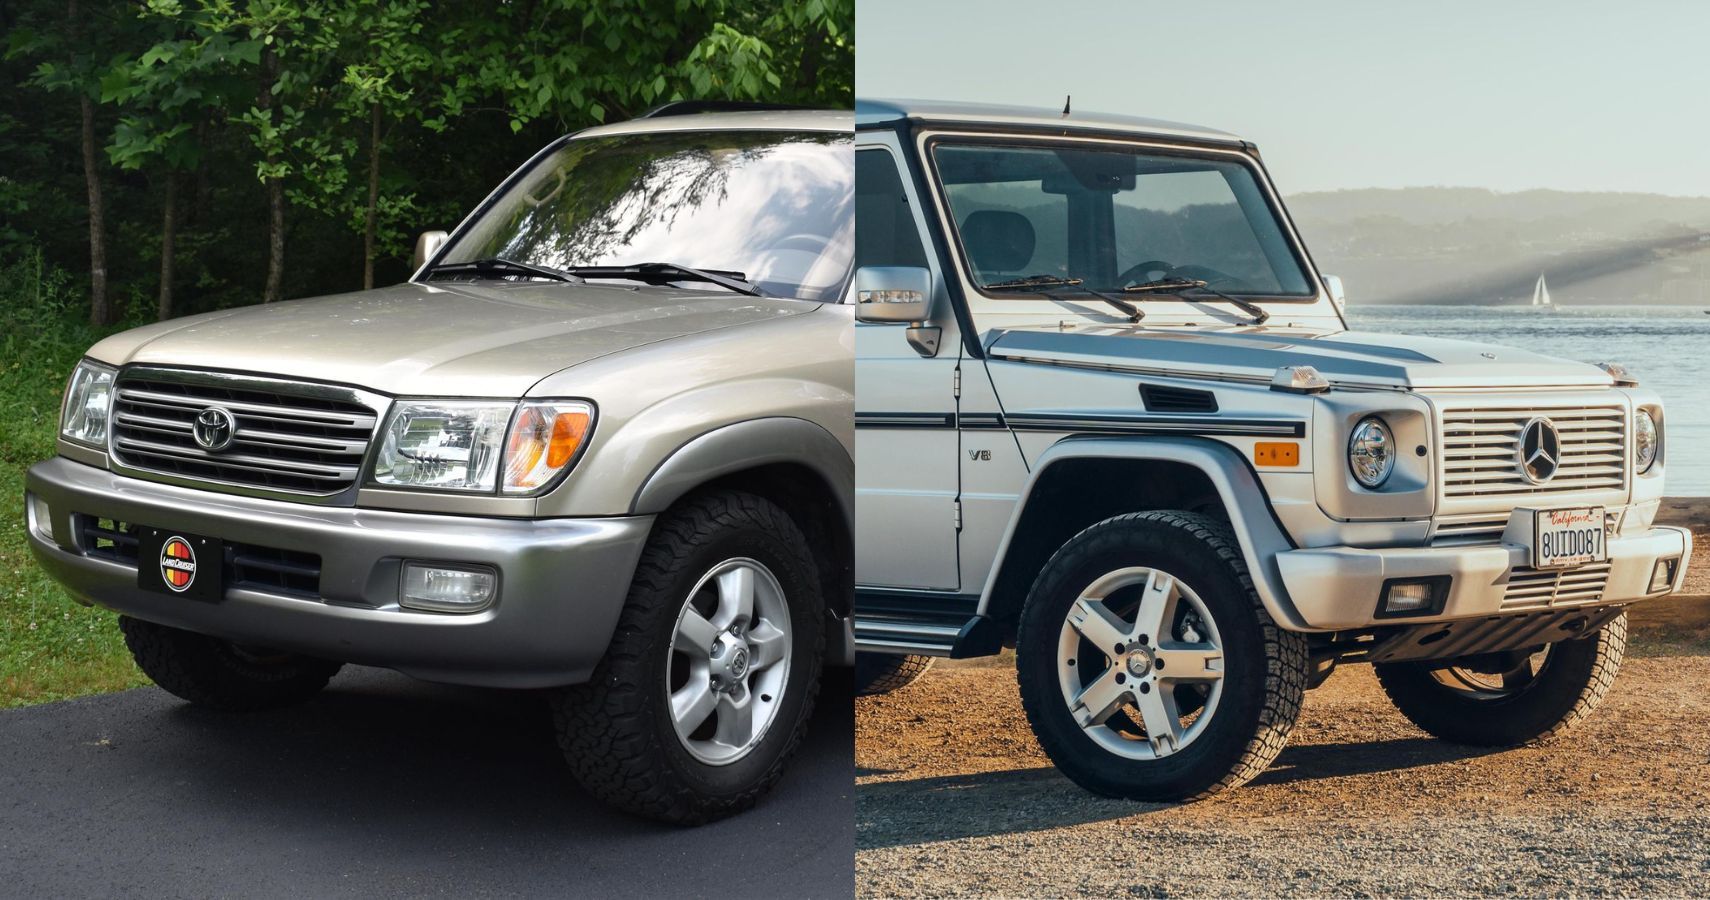 Toyota Land Cruiser and Mercedes-Benz G-Class side-by-side image